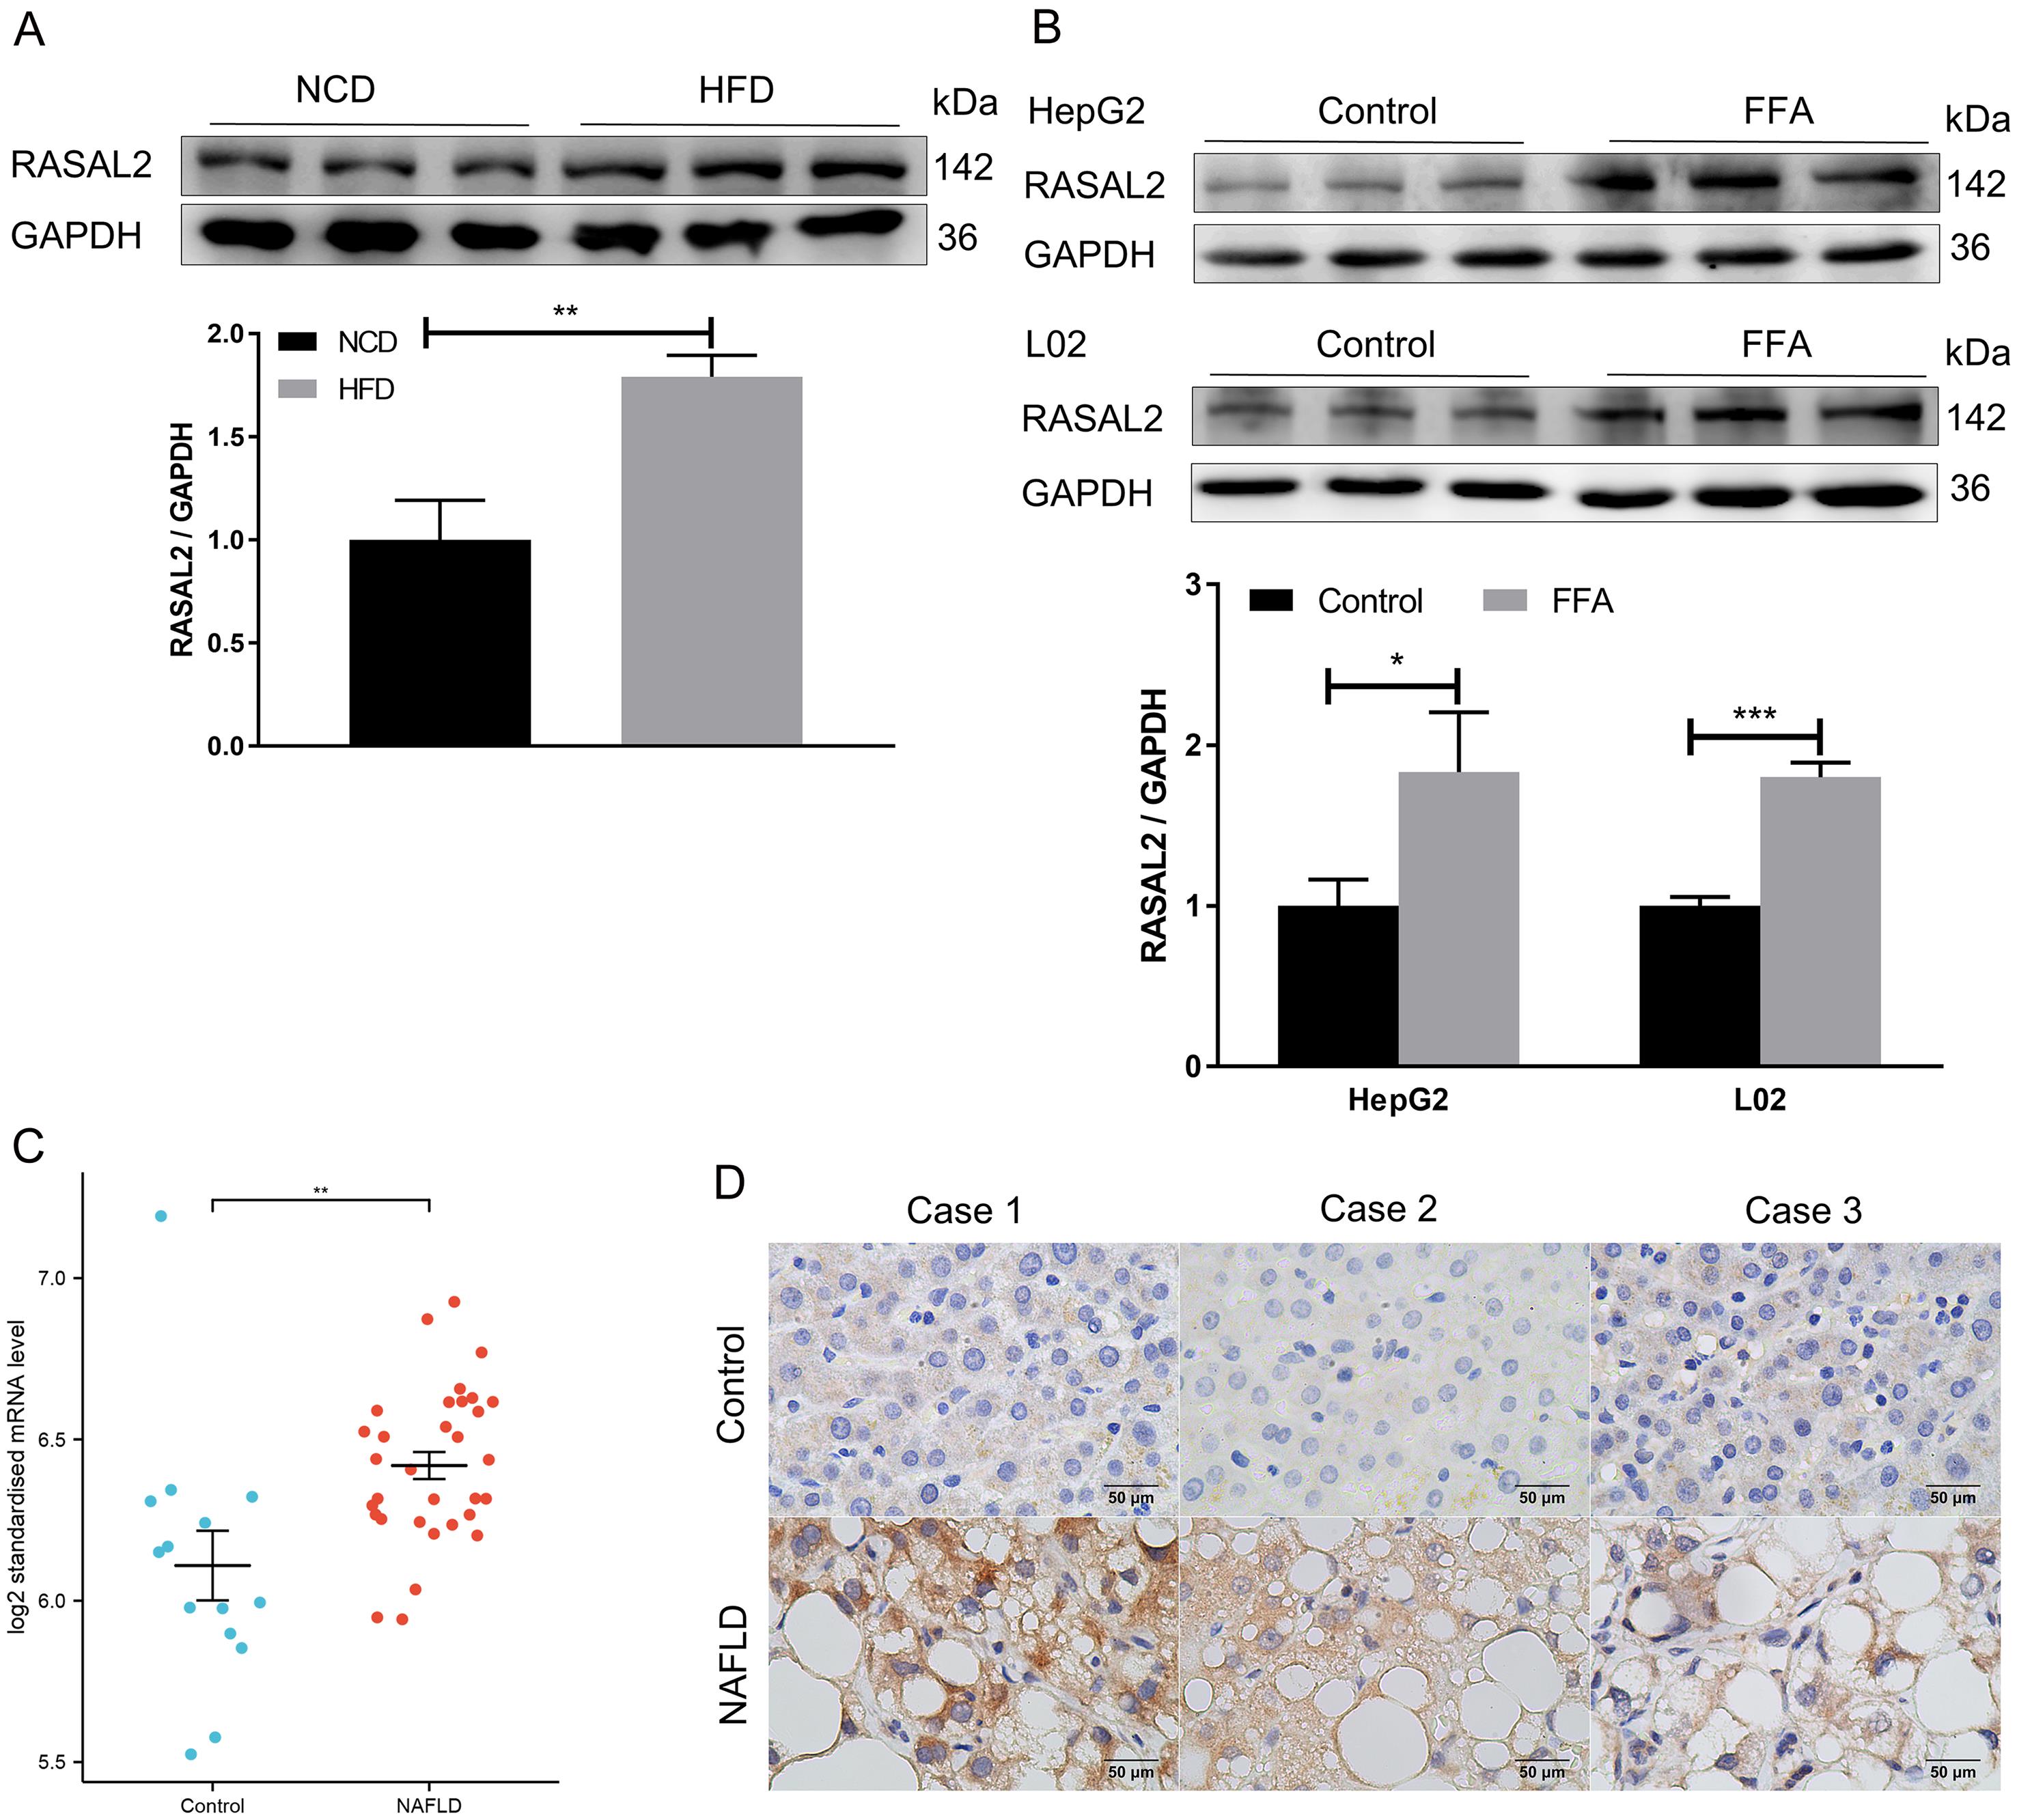 RAS protein activator like 2 (RASAL2) expression is upregulated in steatotic livers.